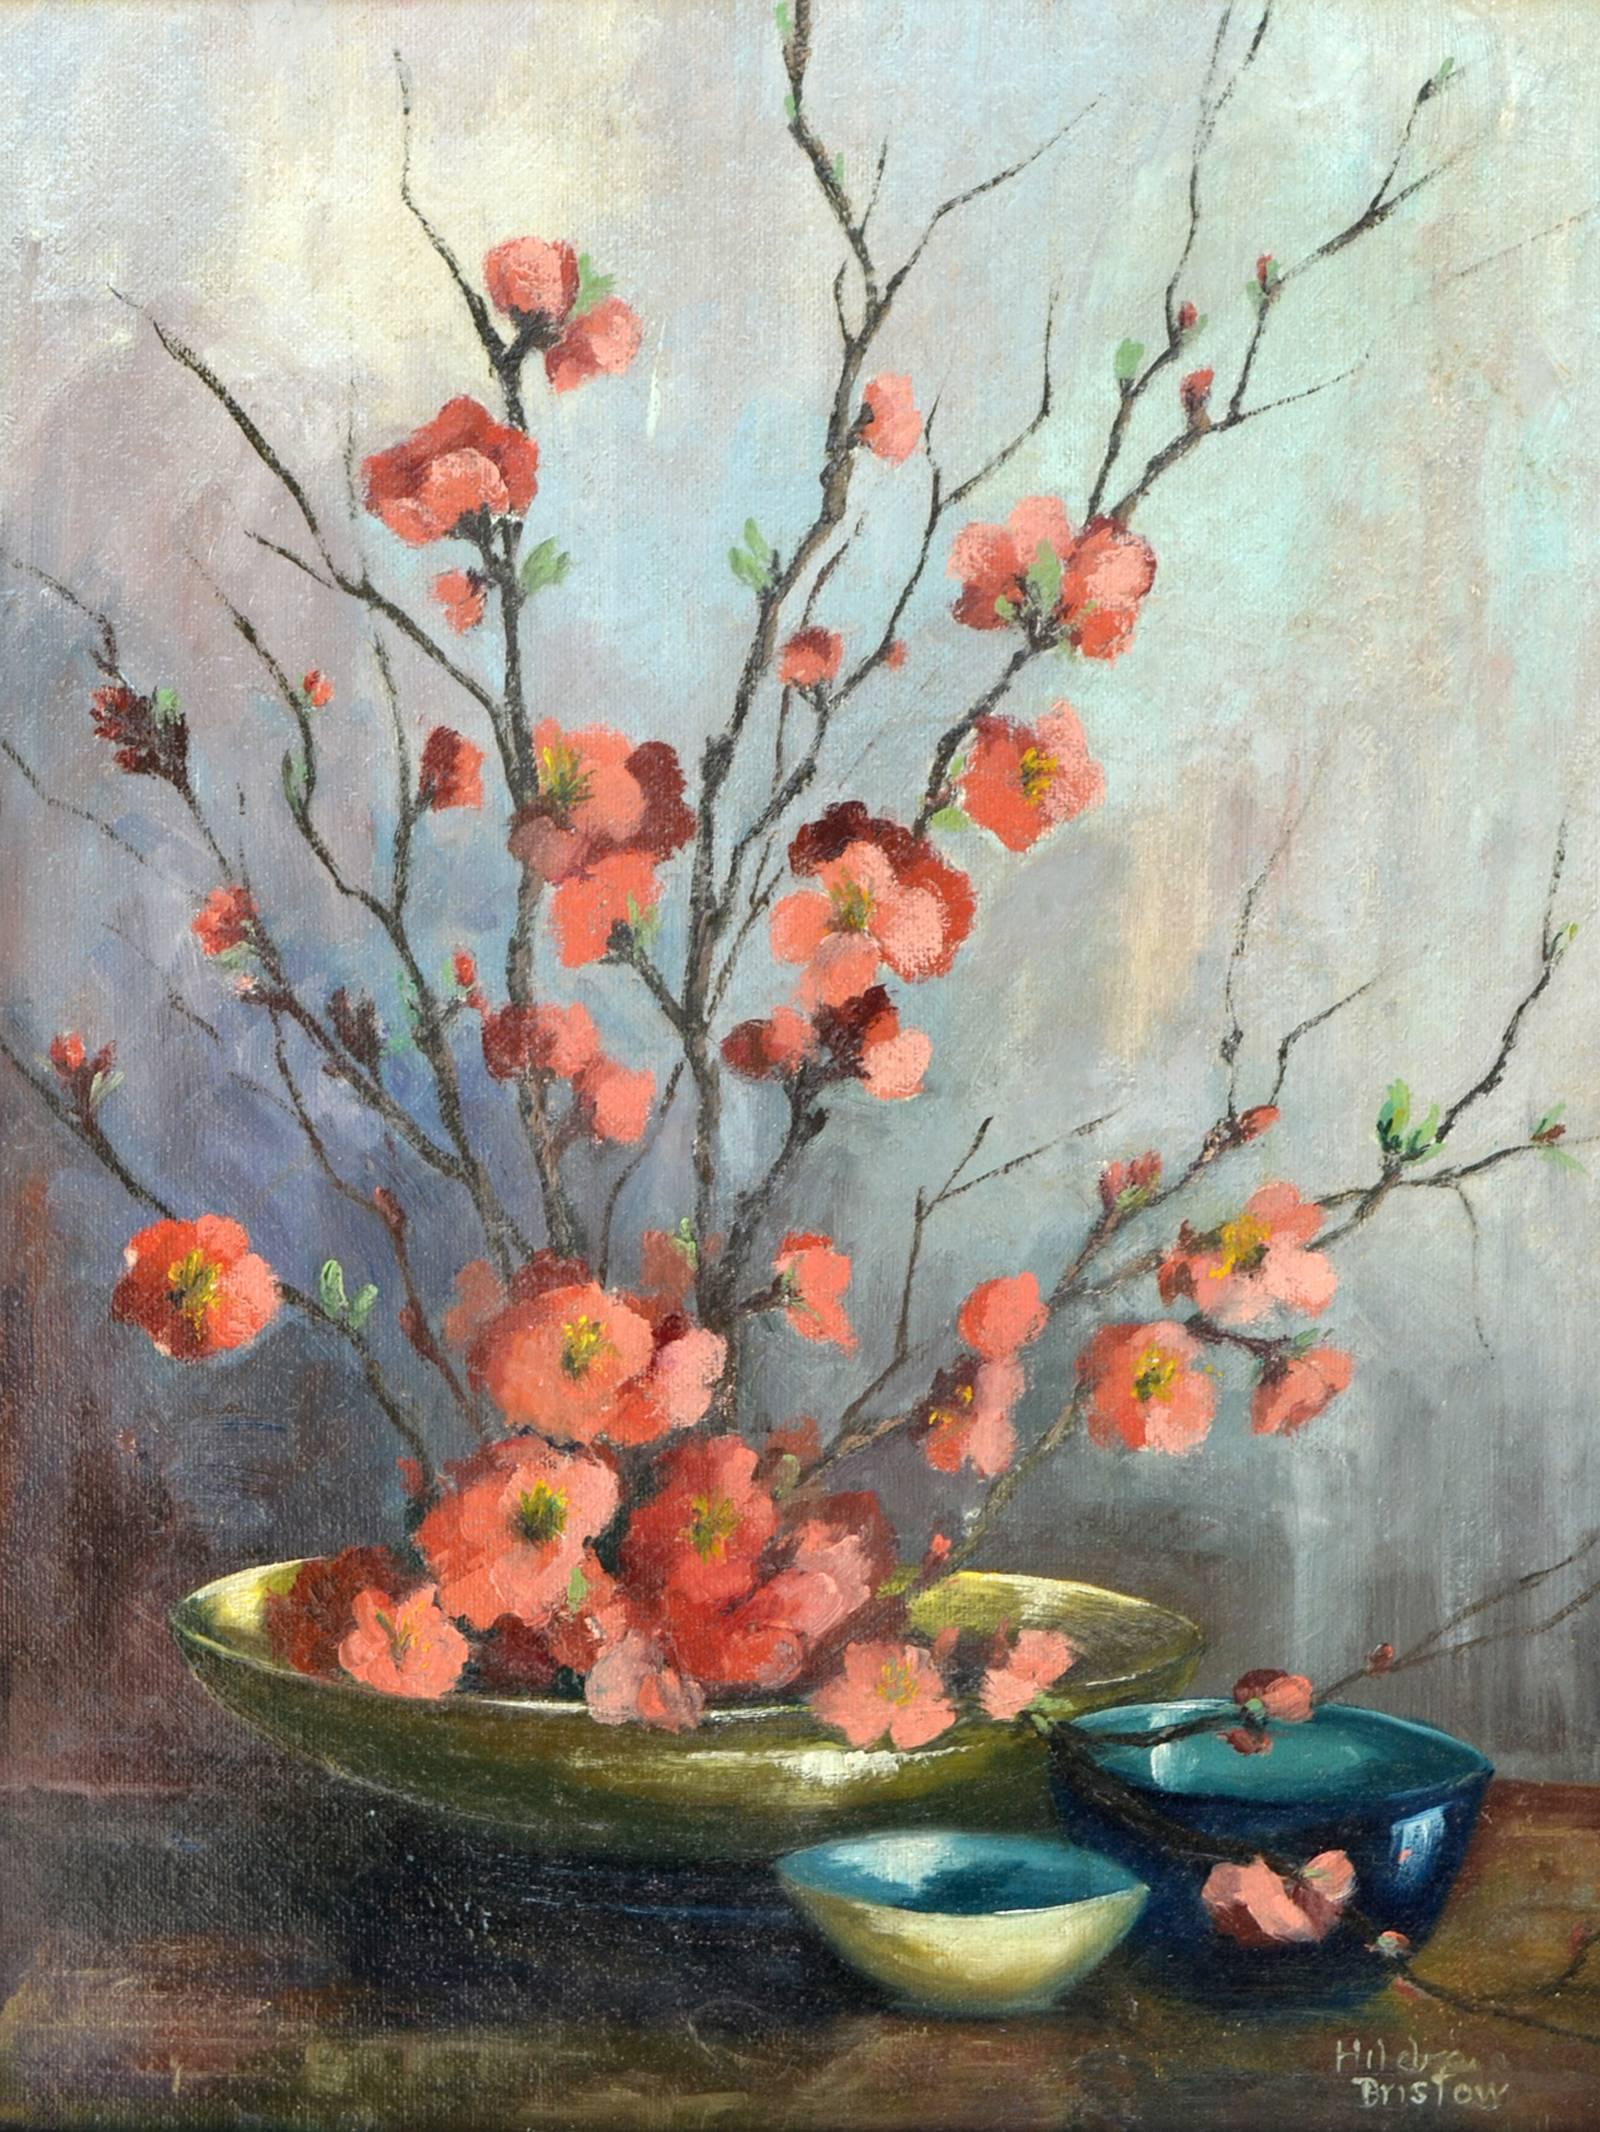 Qunice Blossoms Still Life - Painting by Hilda G. Bristow